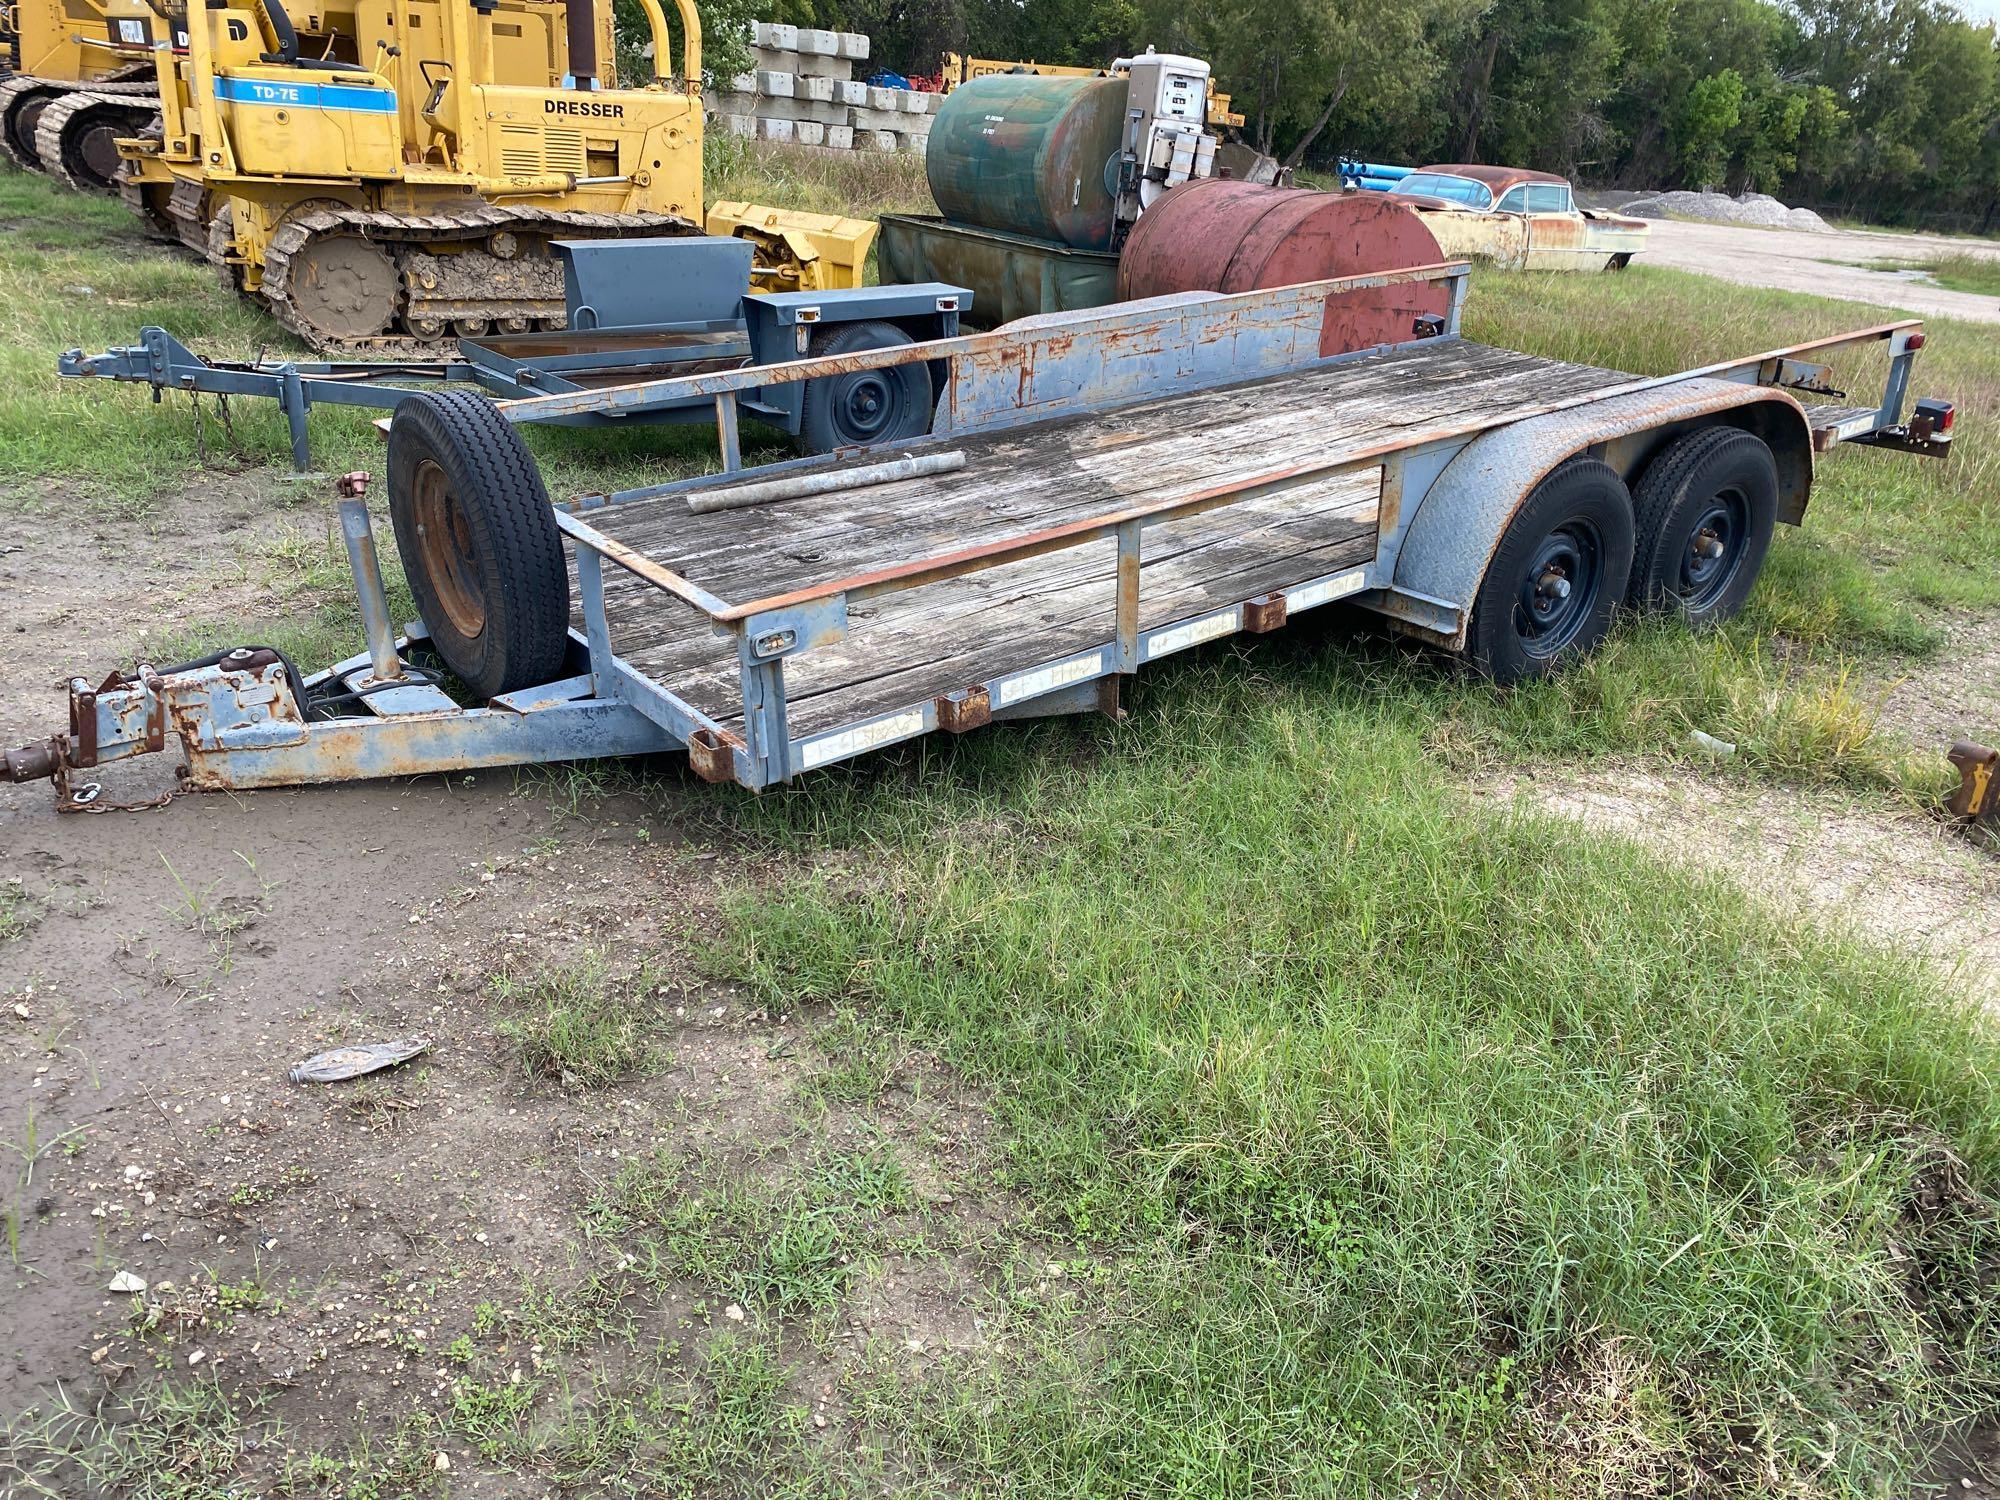 16FT. UTILITY TRAILER VN:N/A Equipped With 16ft. Deck